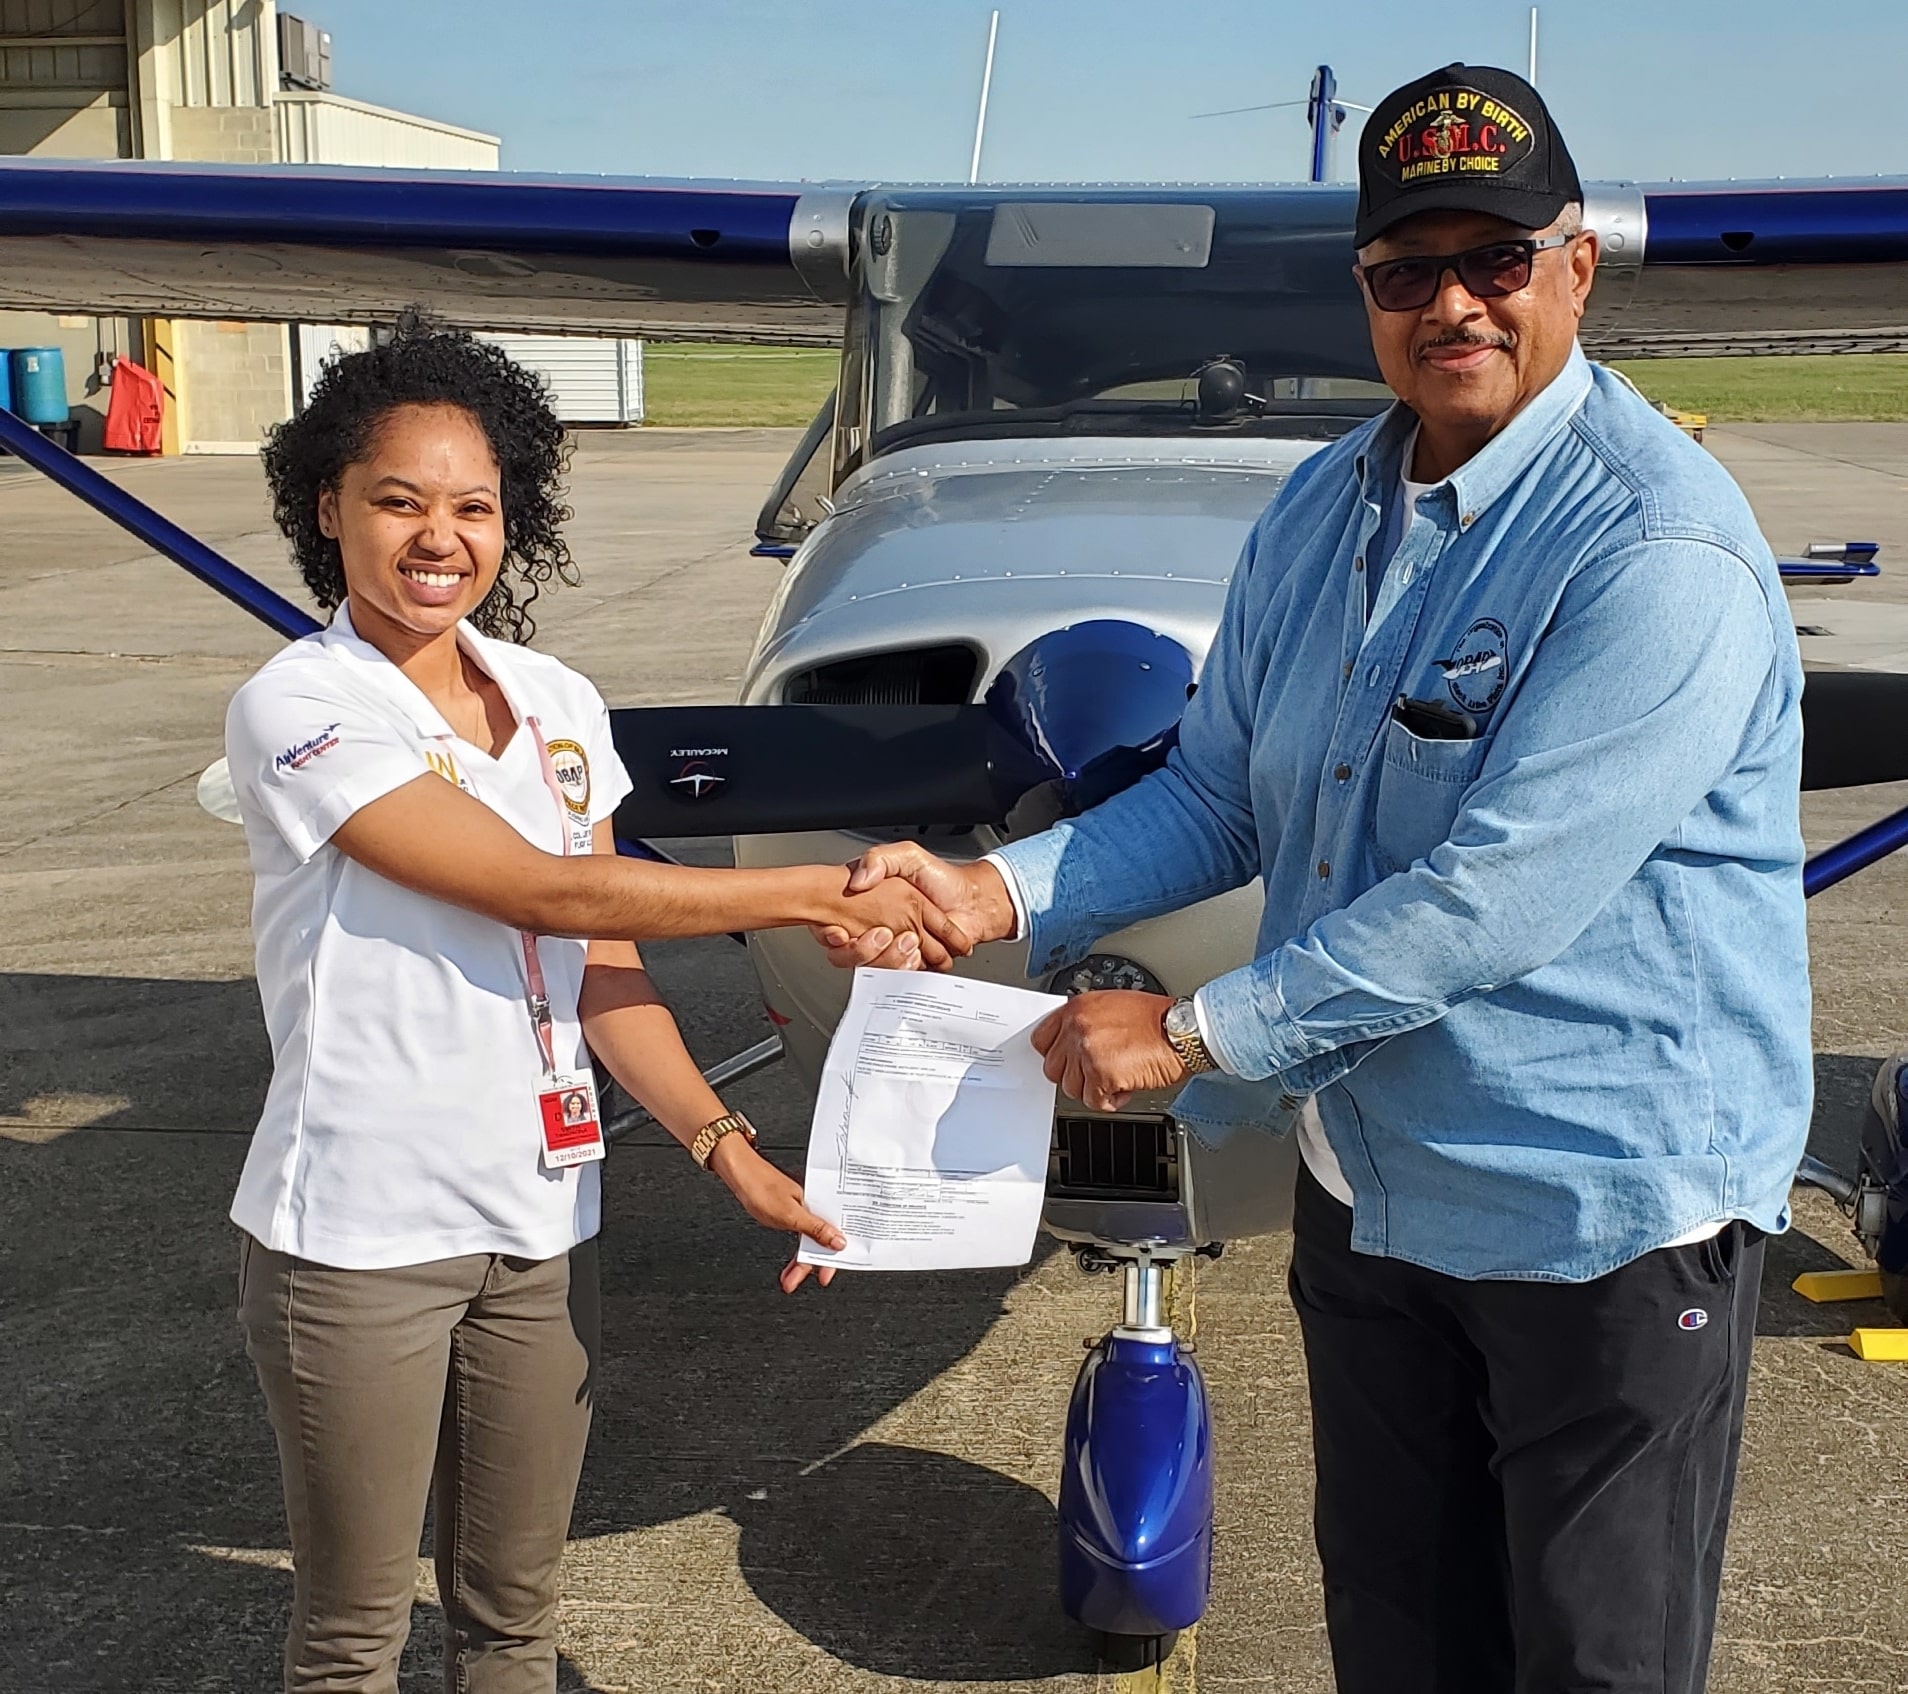 Pilot Tahchiona receiving Certified Flight Instructor - Instrument Rating allowing her to train pilots for their Instrument Rating.